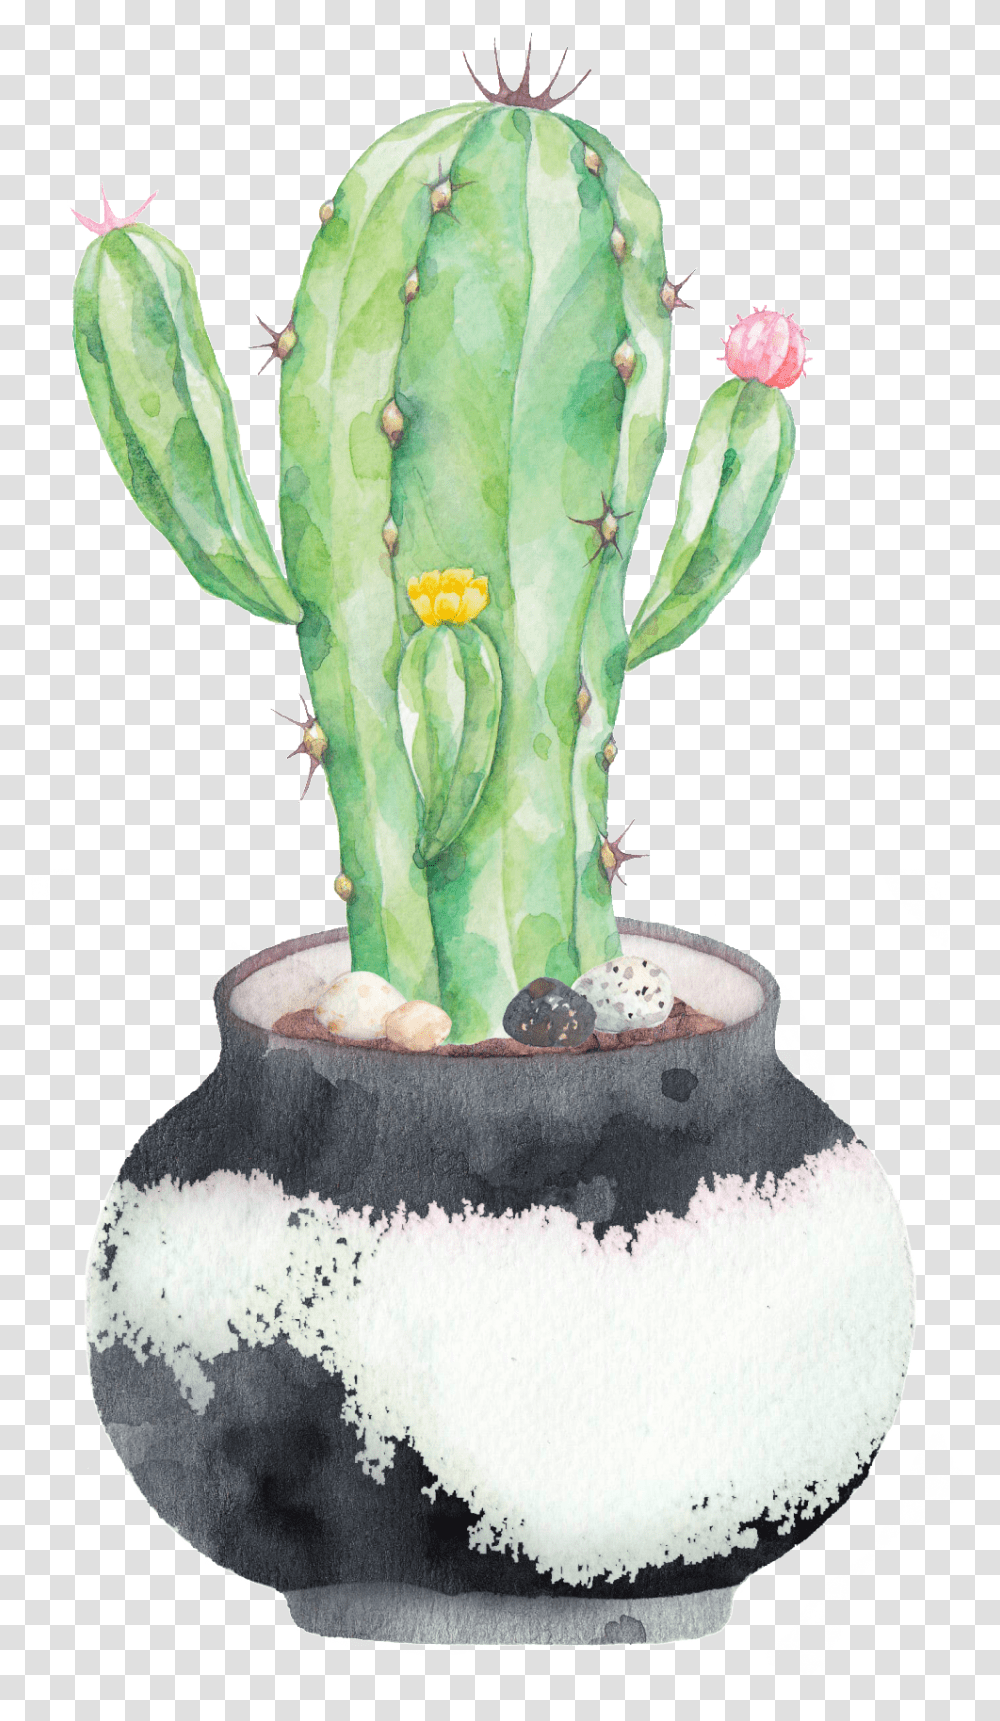 Download Hd Hand Painted A Plate Of Cactus Potted Cactus Watercolor Transparent Png